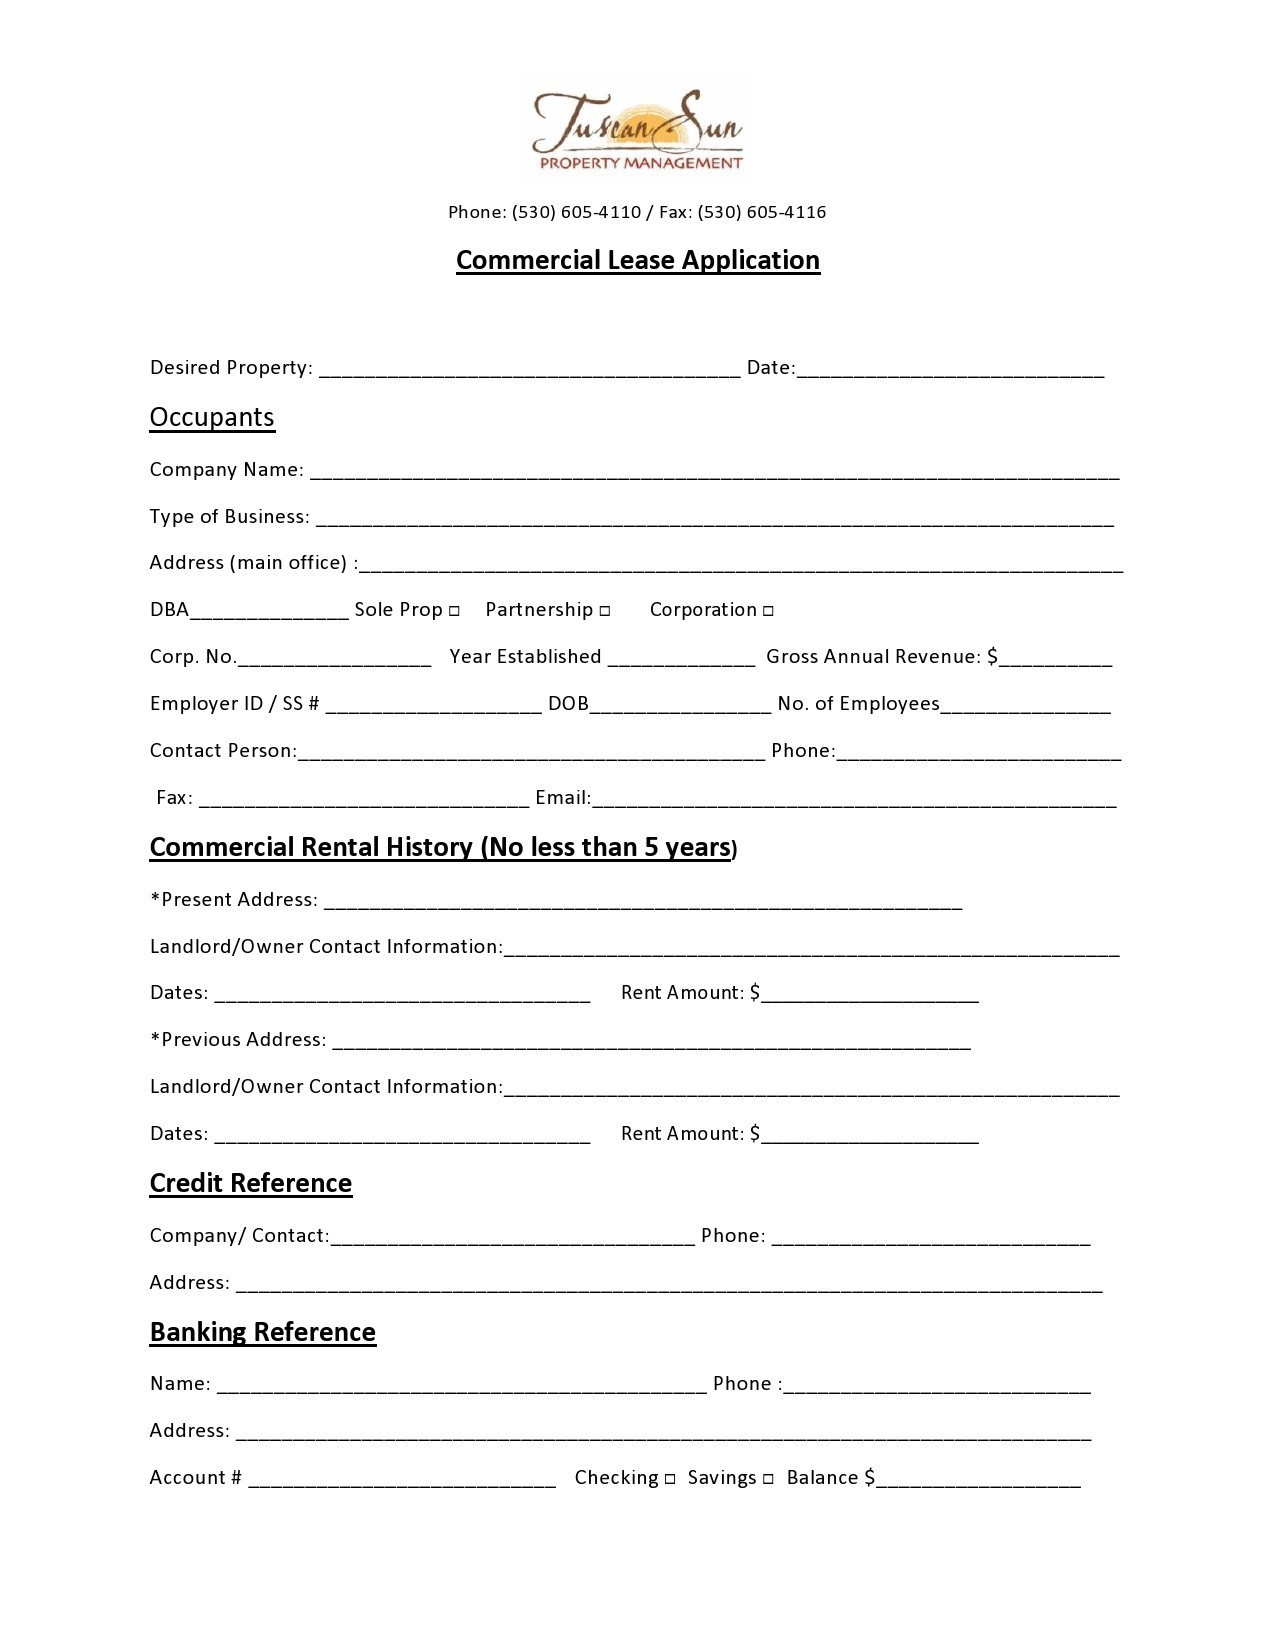 Free commercial lease application 08